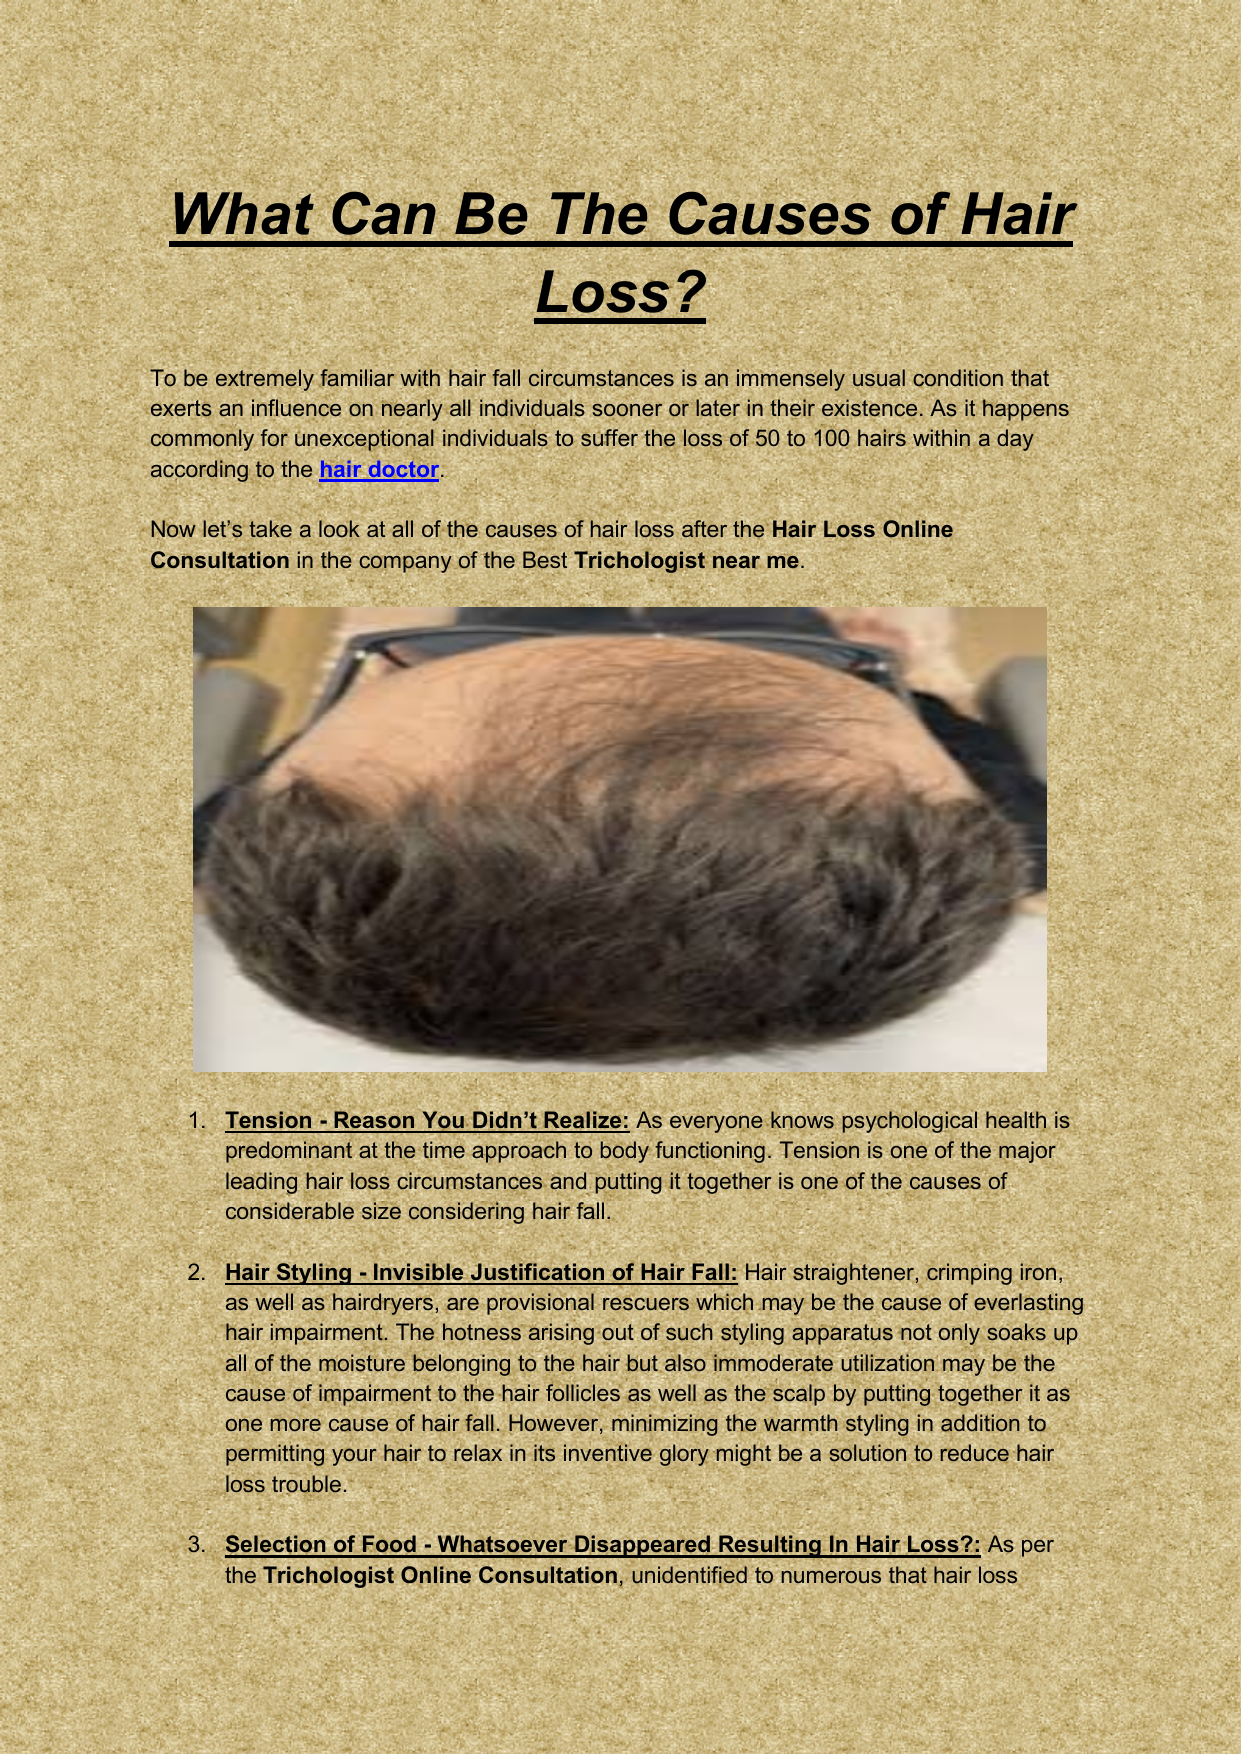 What Can Be The Causes of Hair Loss